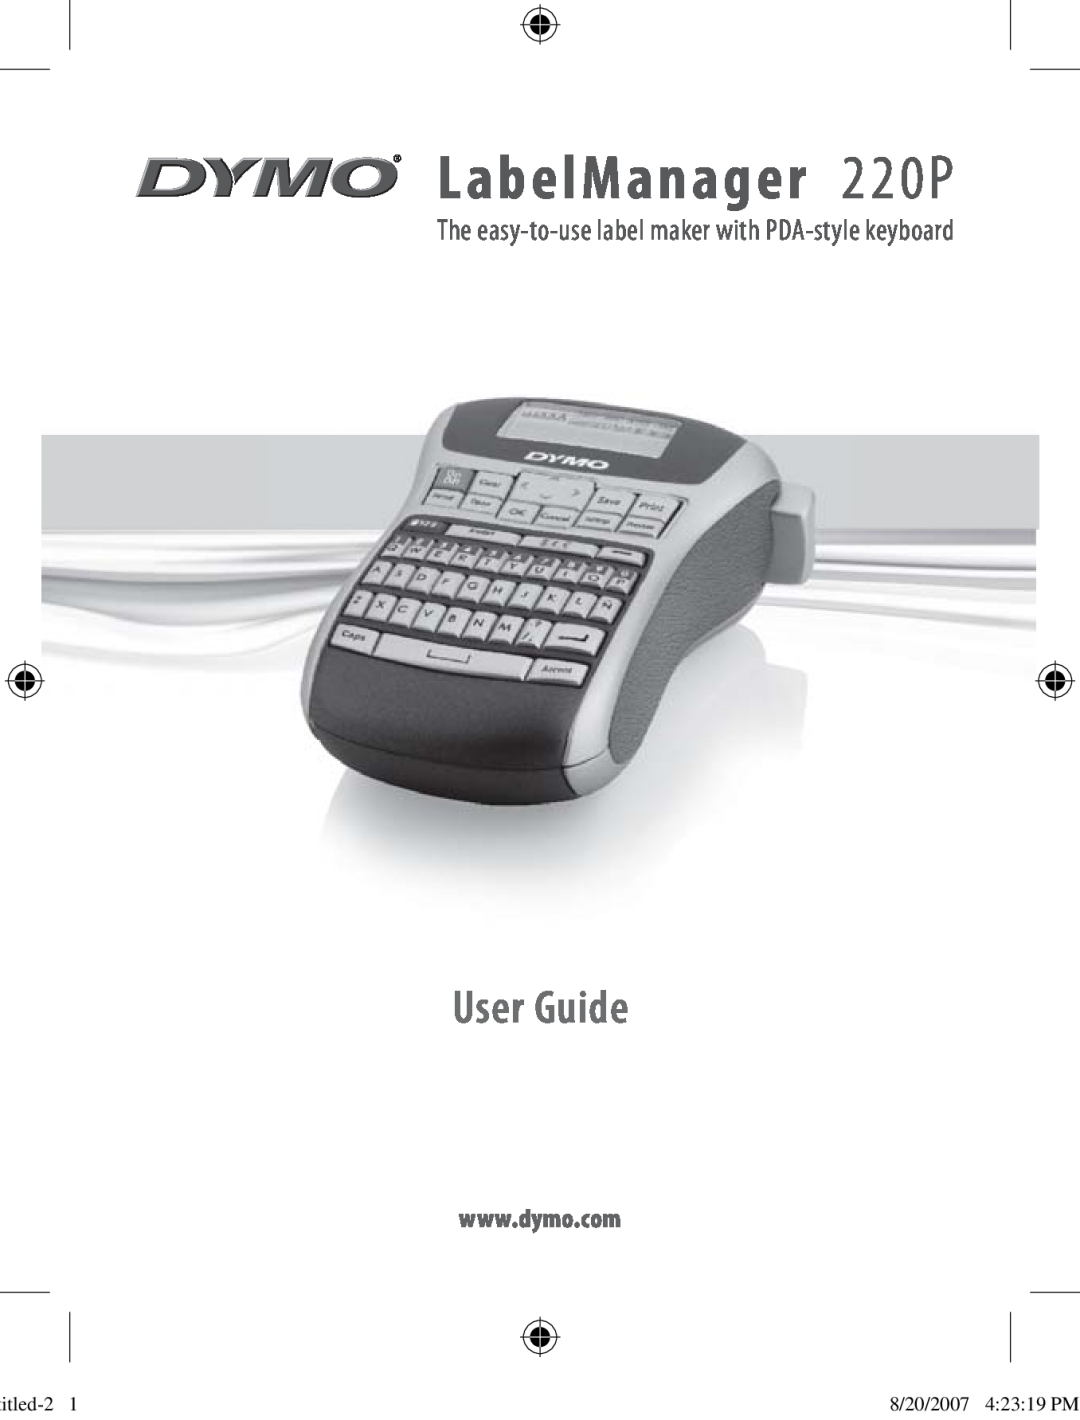 Dymo manual LabelManager 220P, User Guide, The easy-to-use label maker with PDA-style keyboard, titled-2 